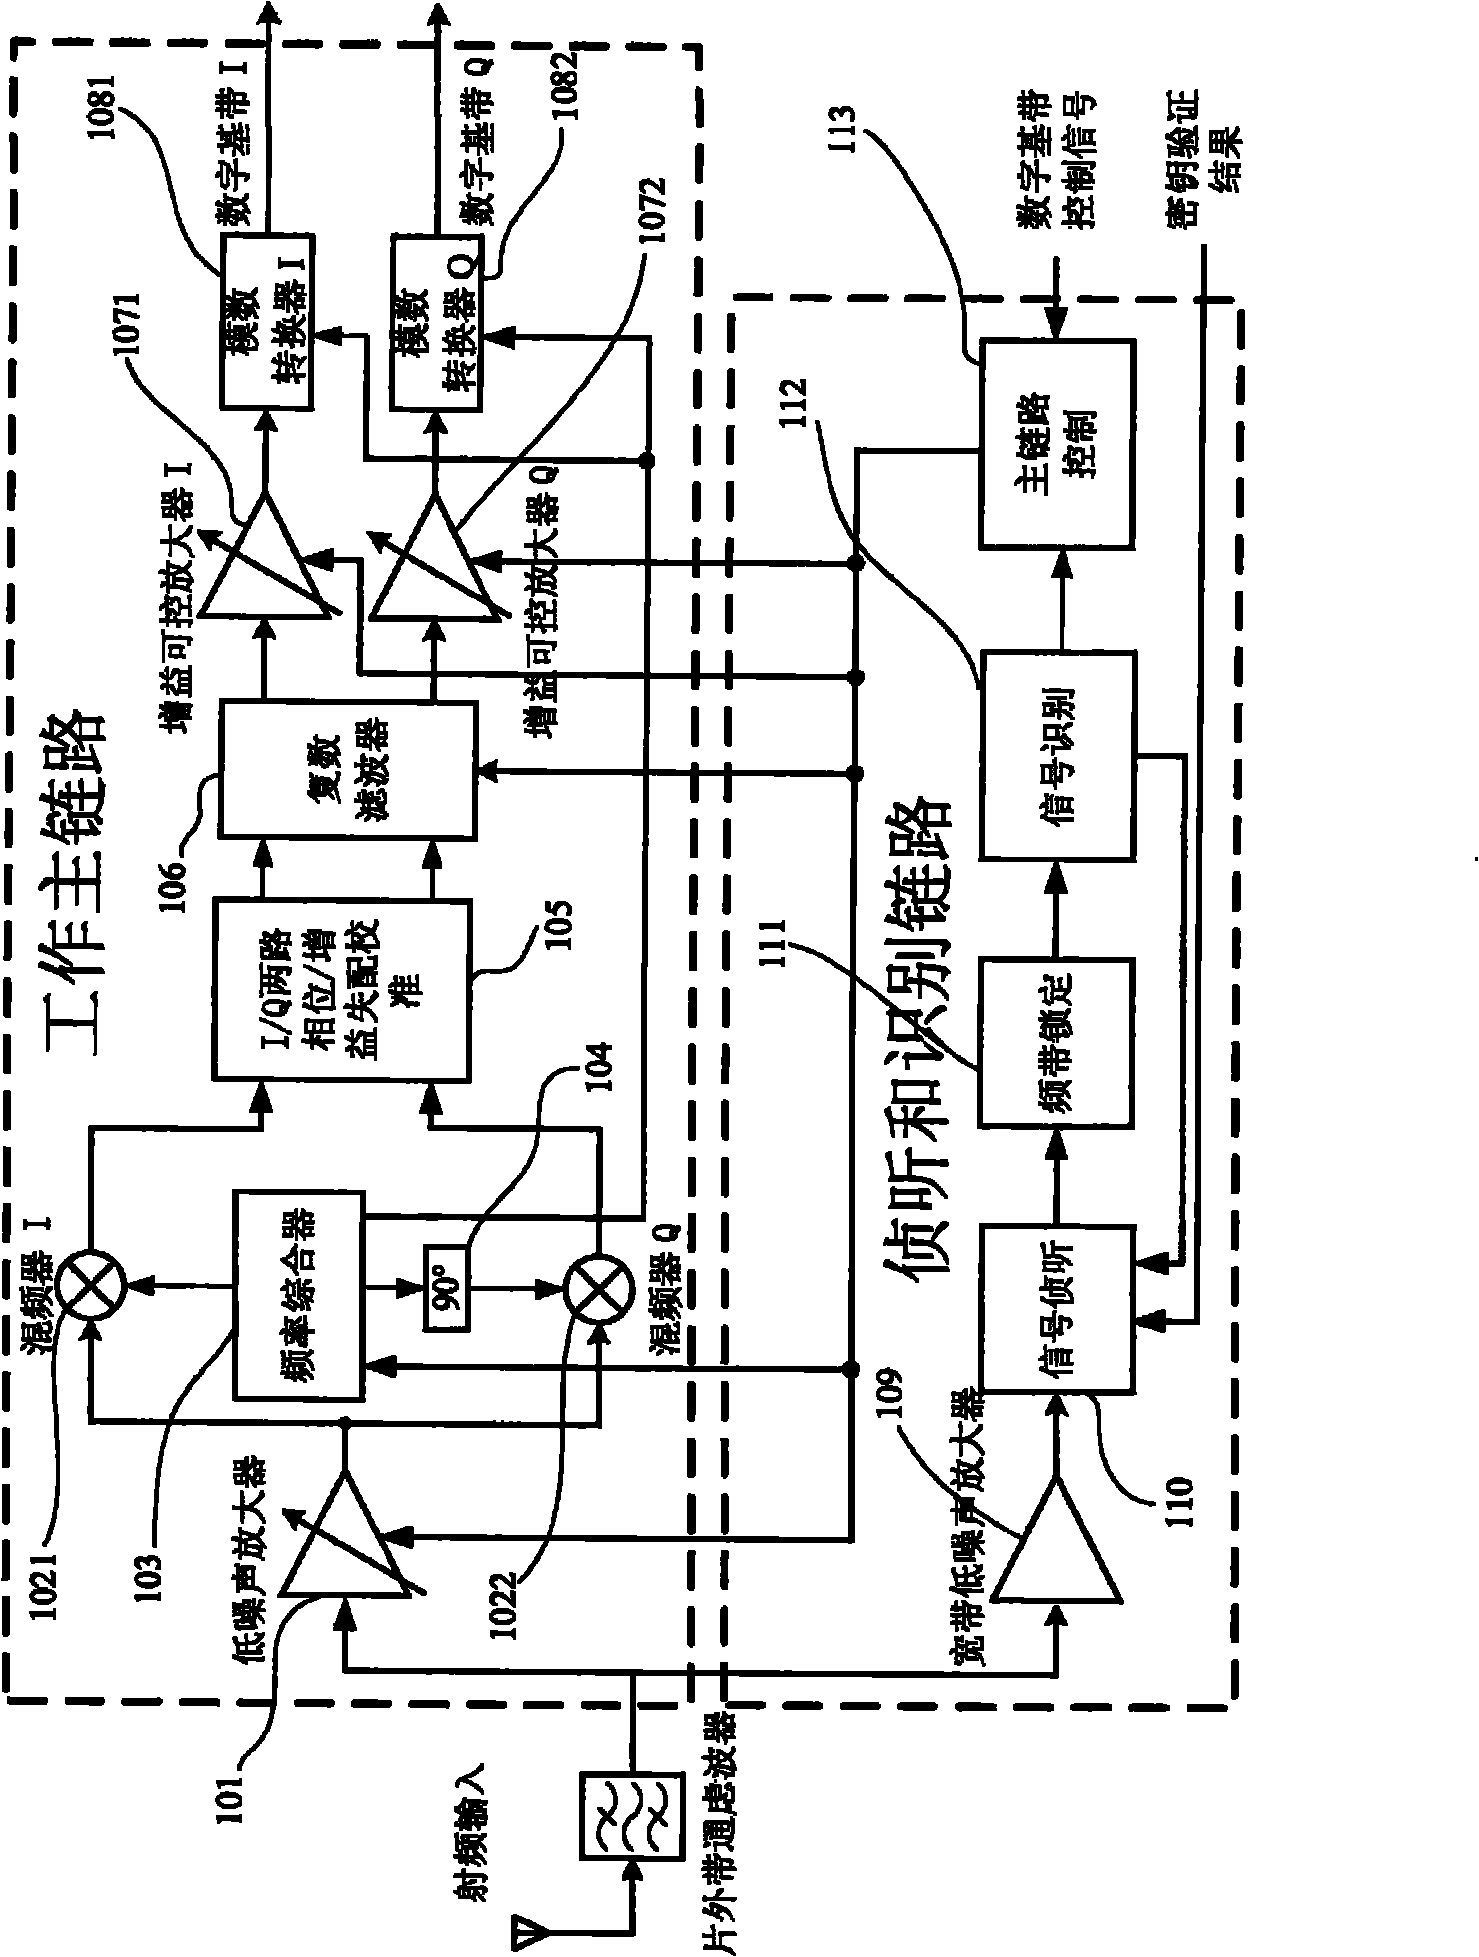 Ultra-wideband multi-mode automatic identification dual-link radio-frequency receiver front-end chip